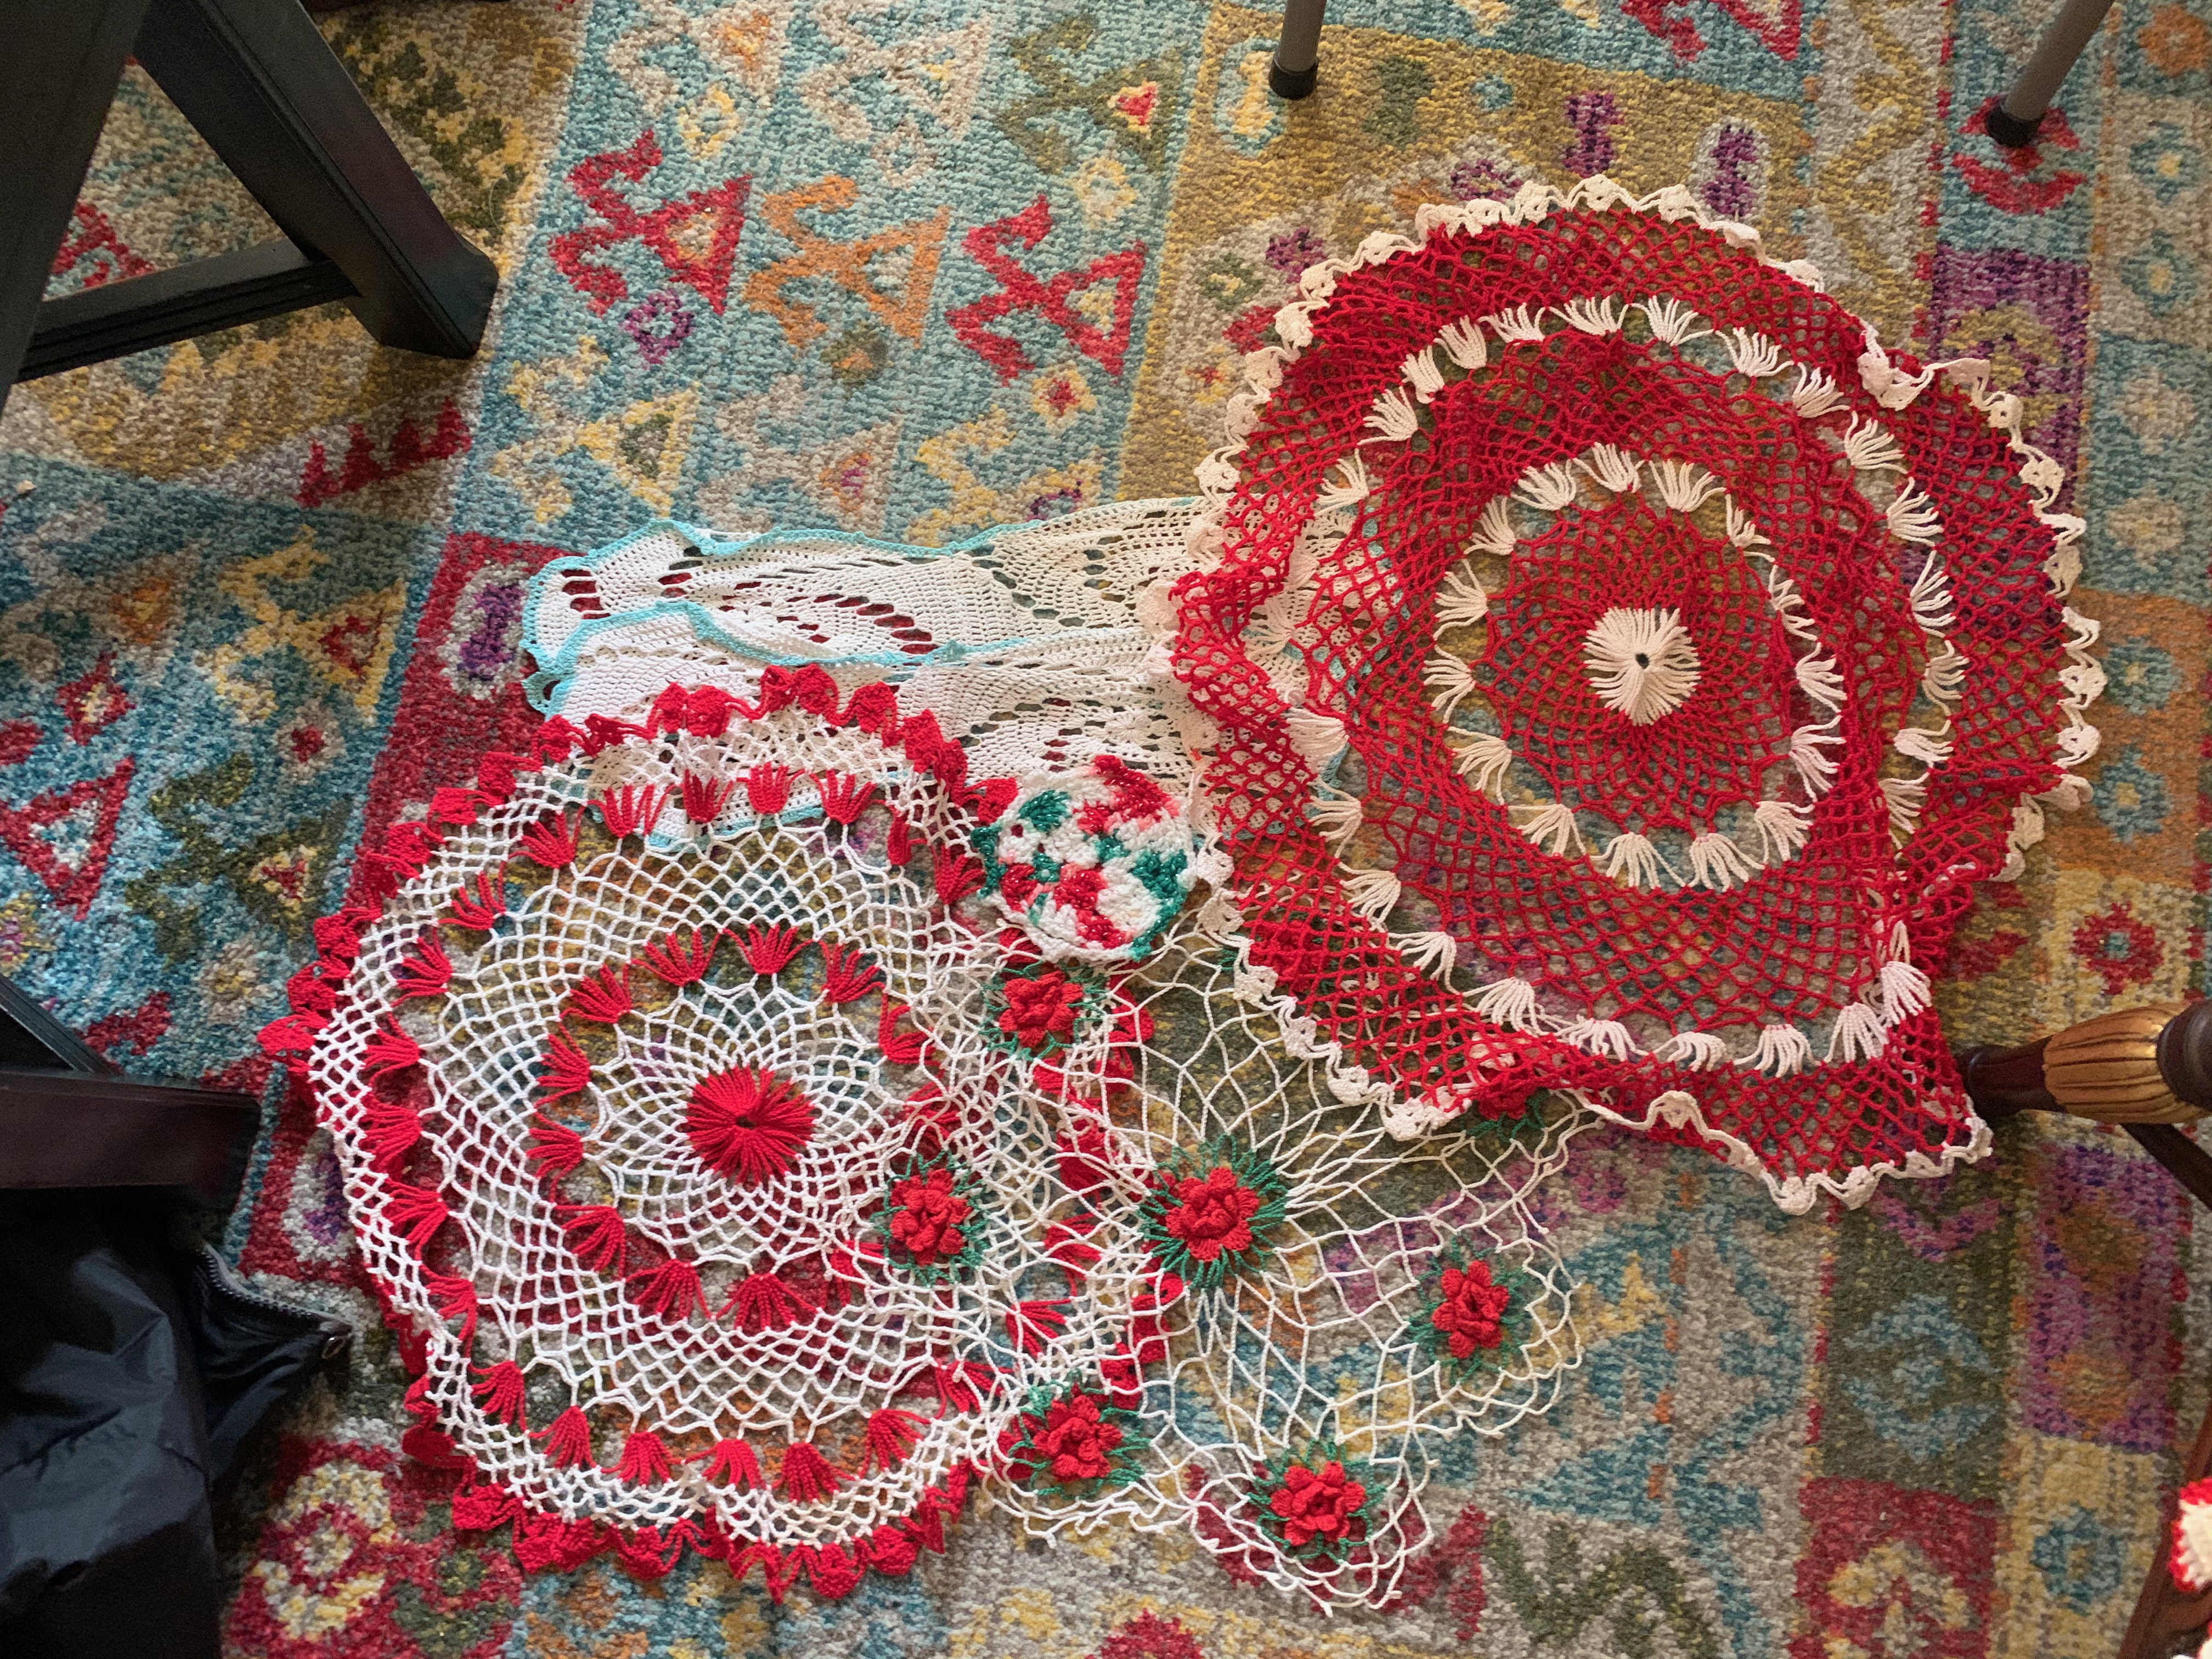 1950s Lot of 6 Crocheted Lace & Knitted Holiday Christmas Doilies, Assorted Sizes